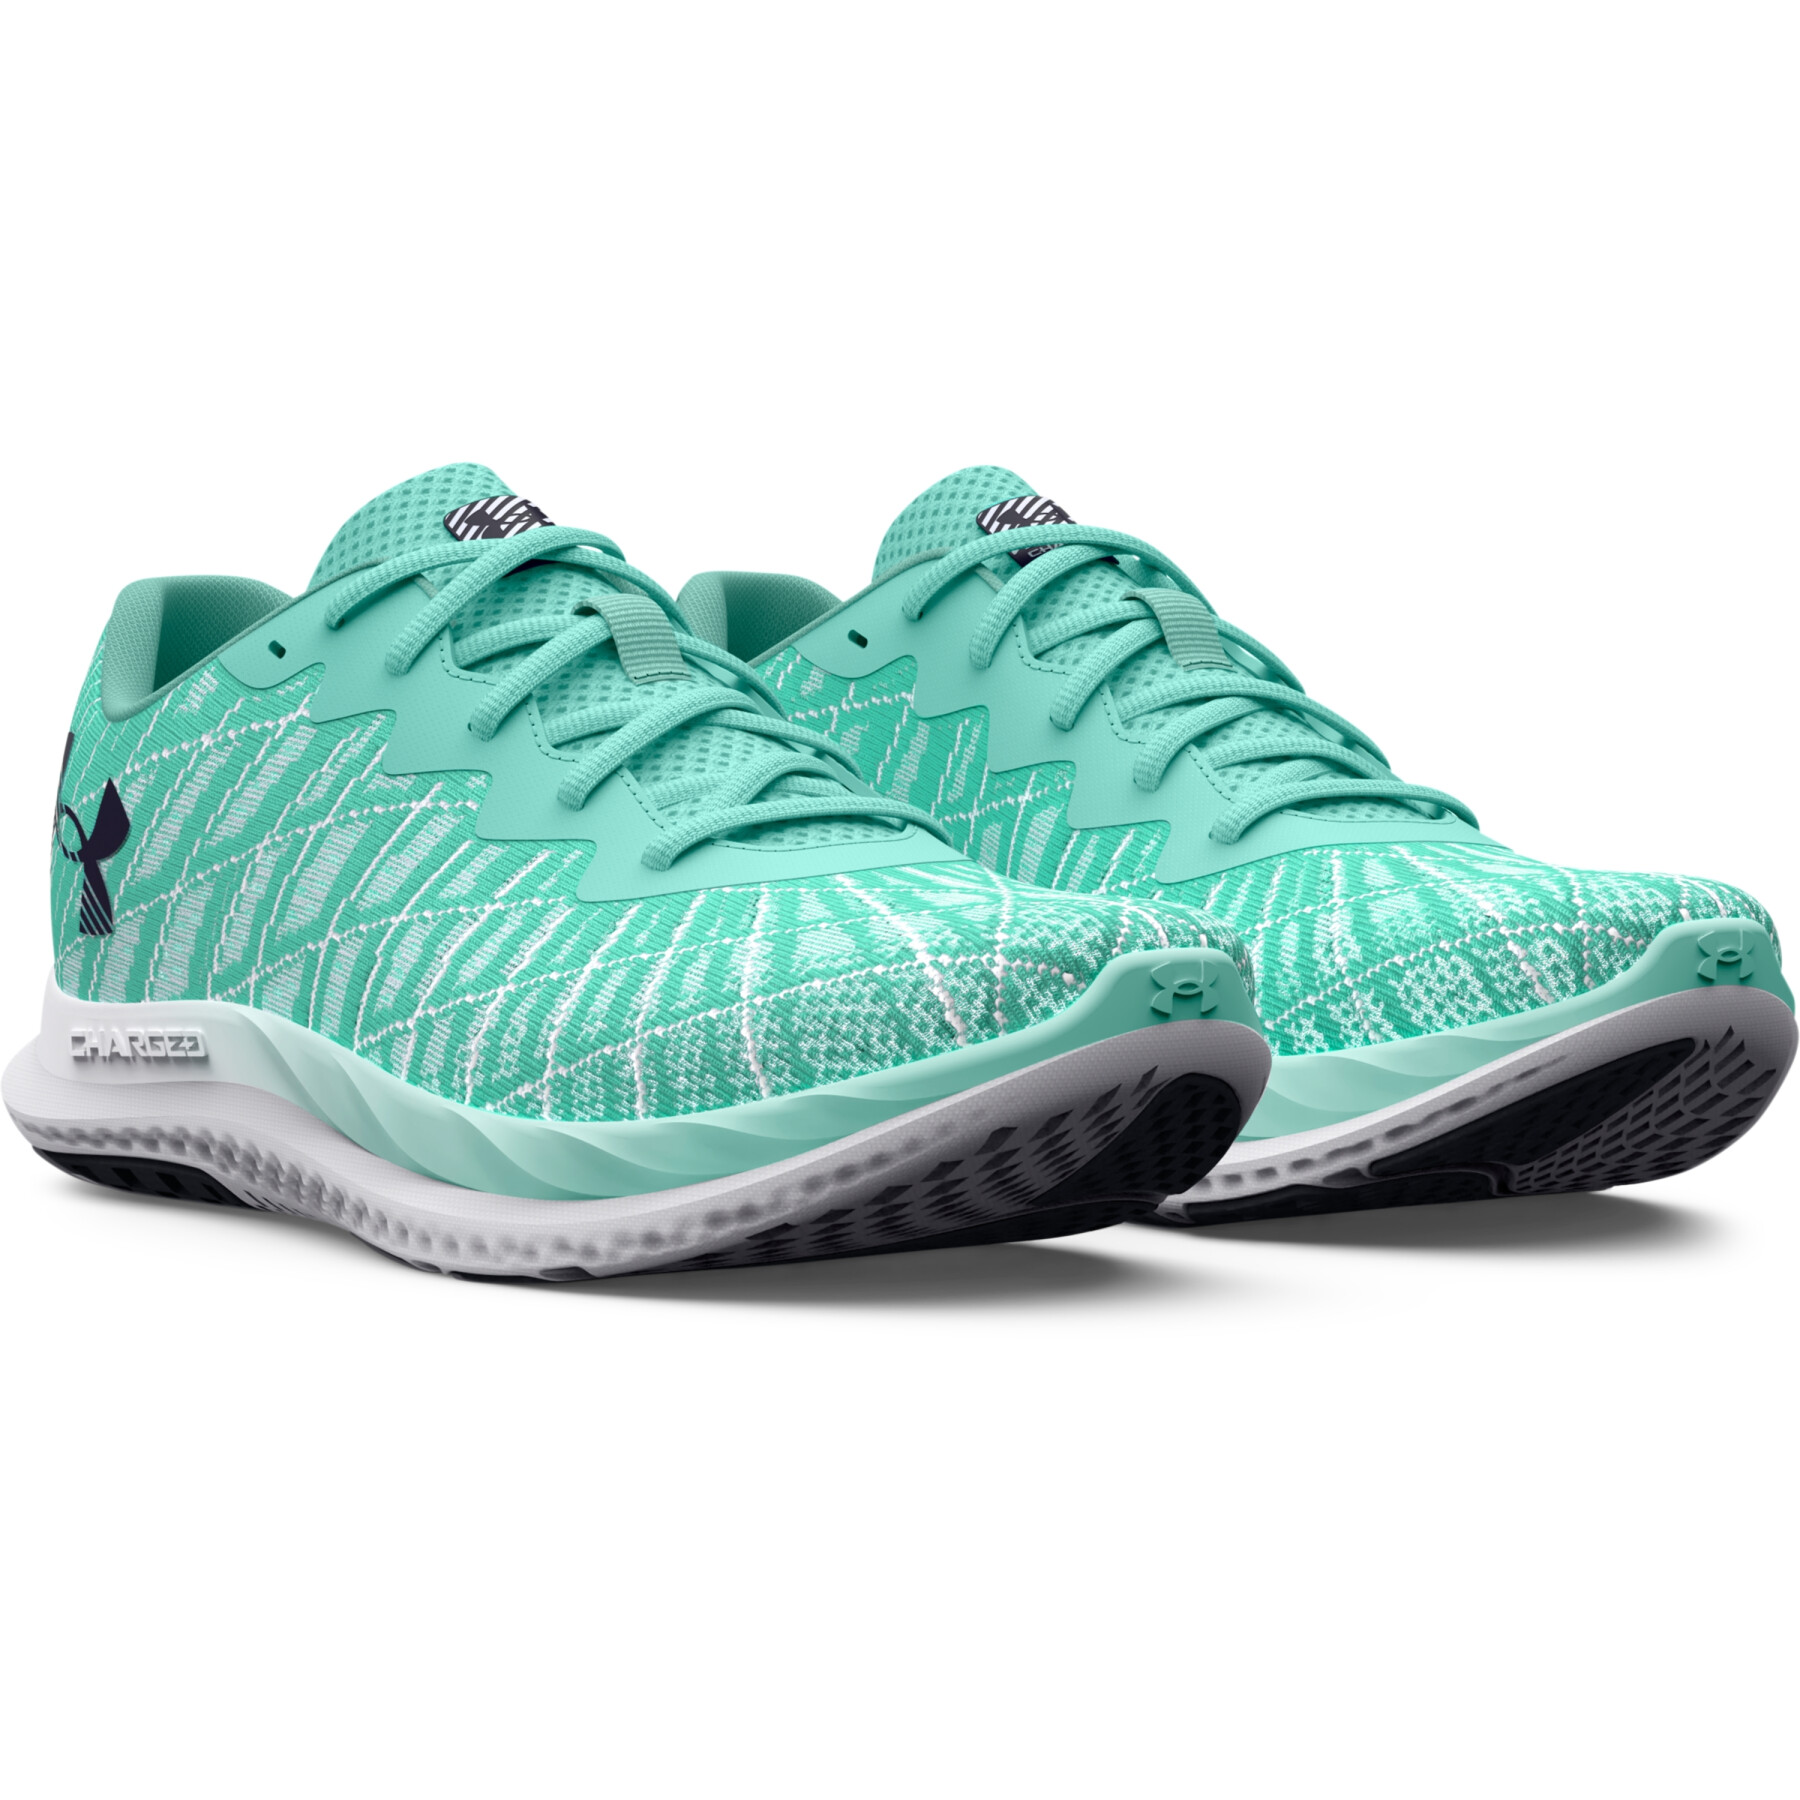 Women's running shoes Under Armour Charged Breeze 2